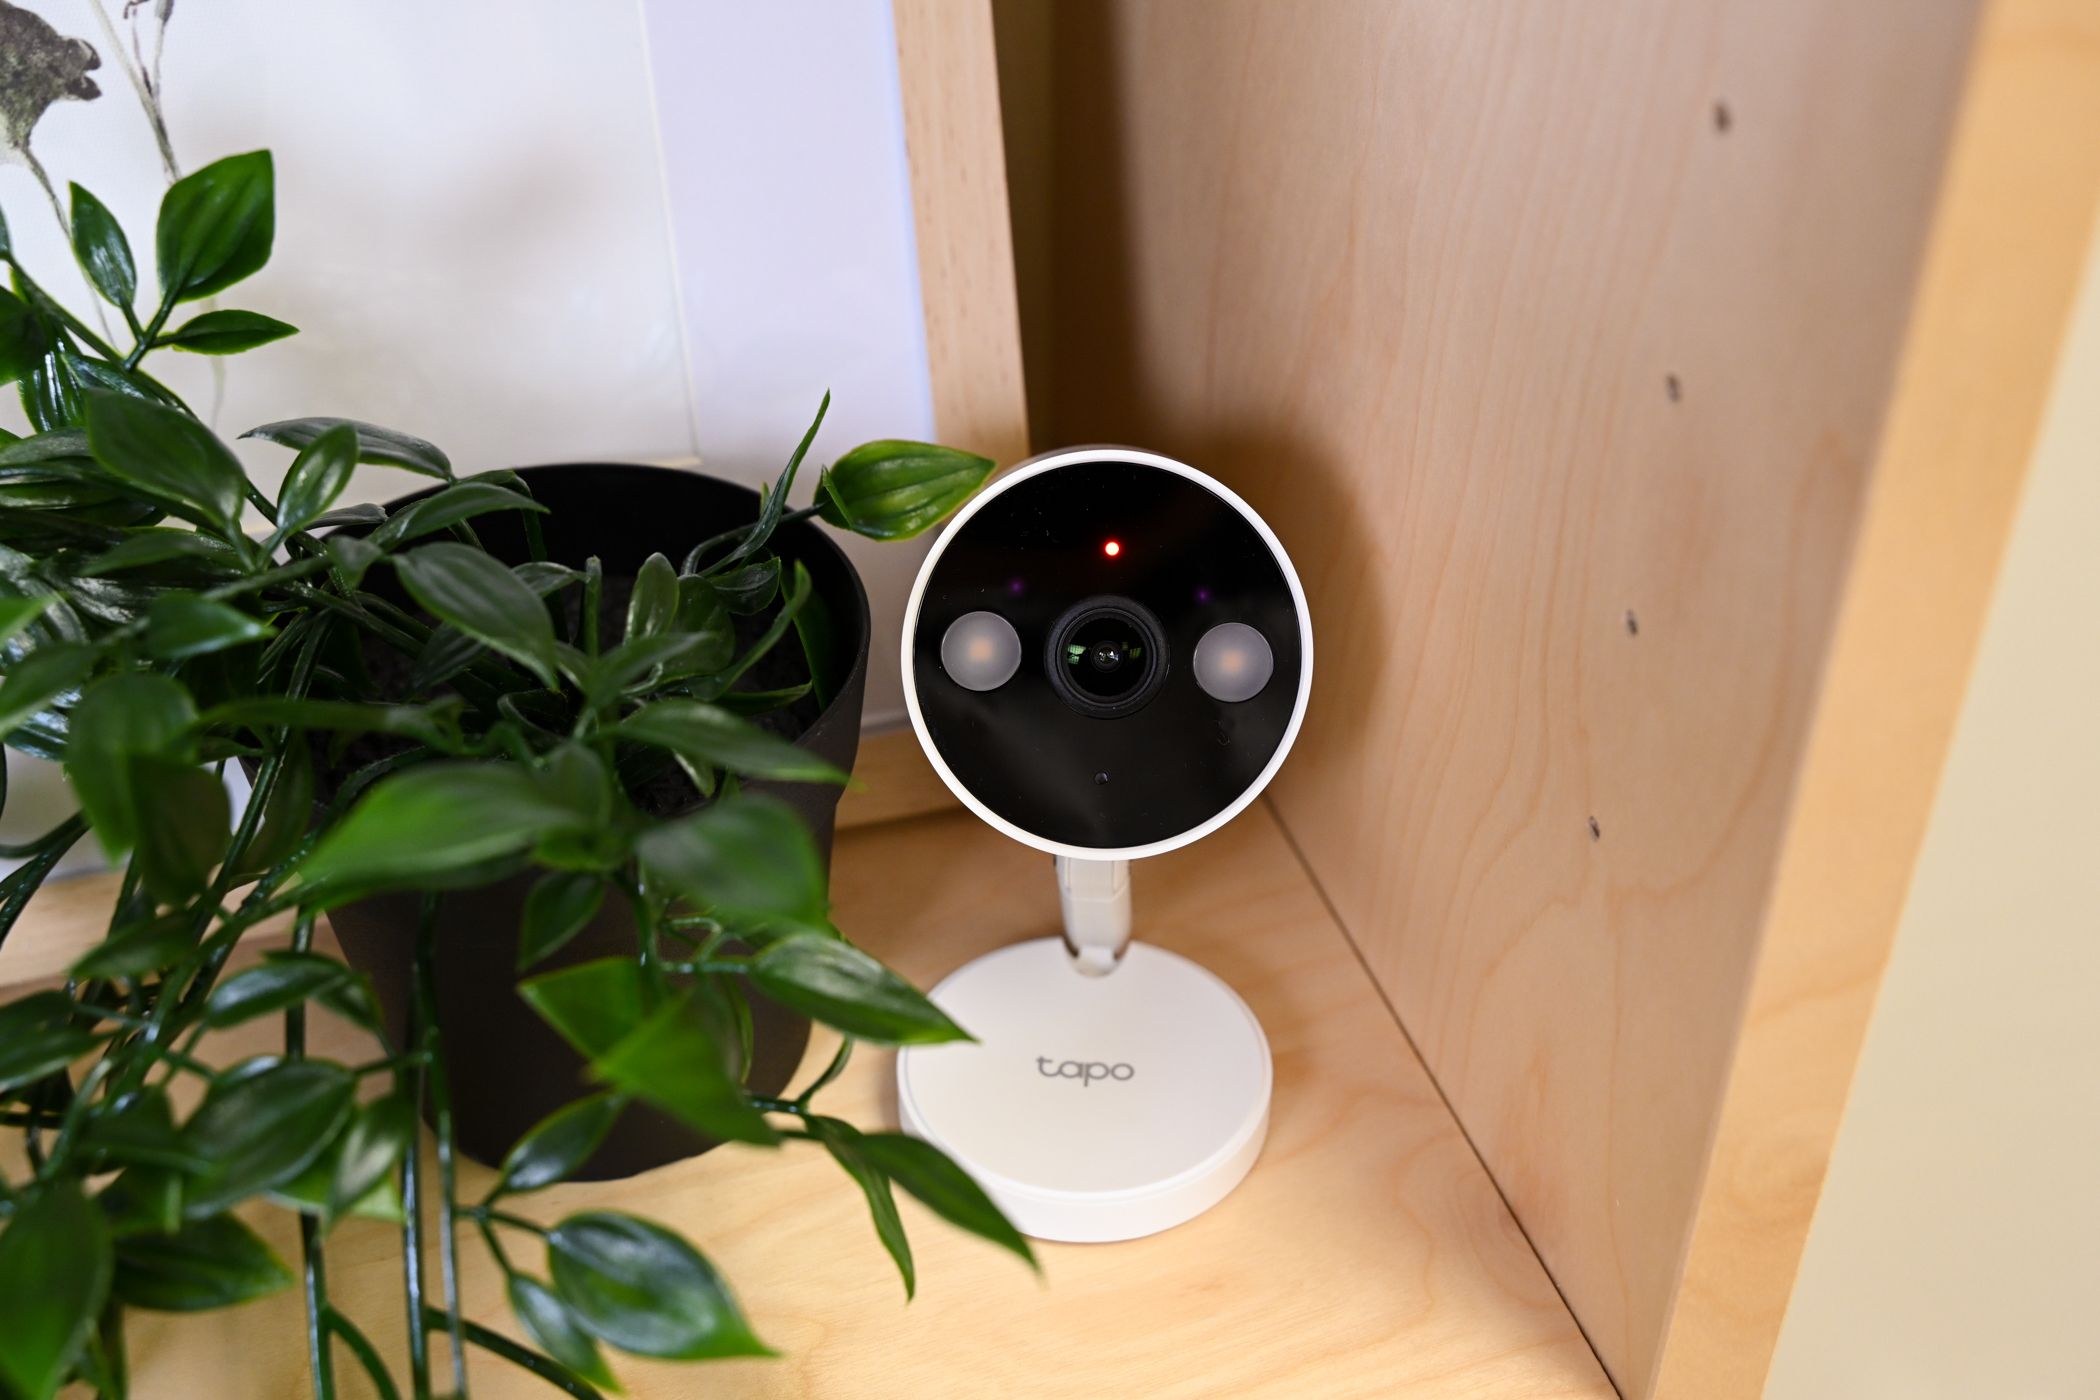 Tapo Security Camera with Red Recording light on sitting on bookshelf with plant